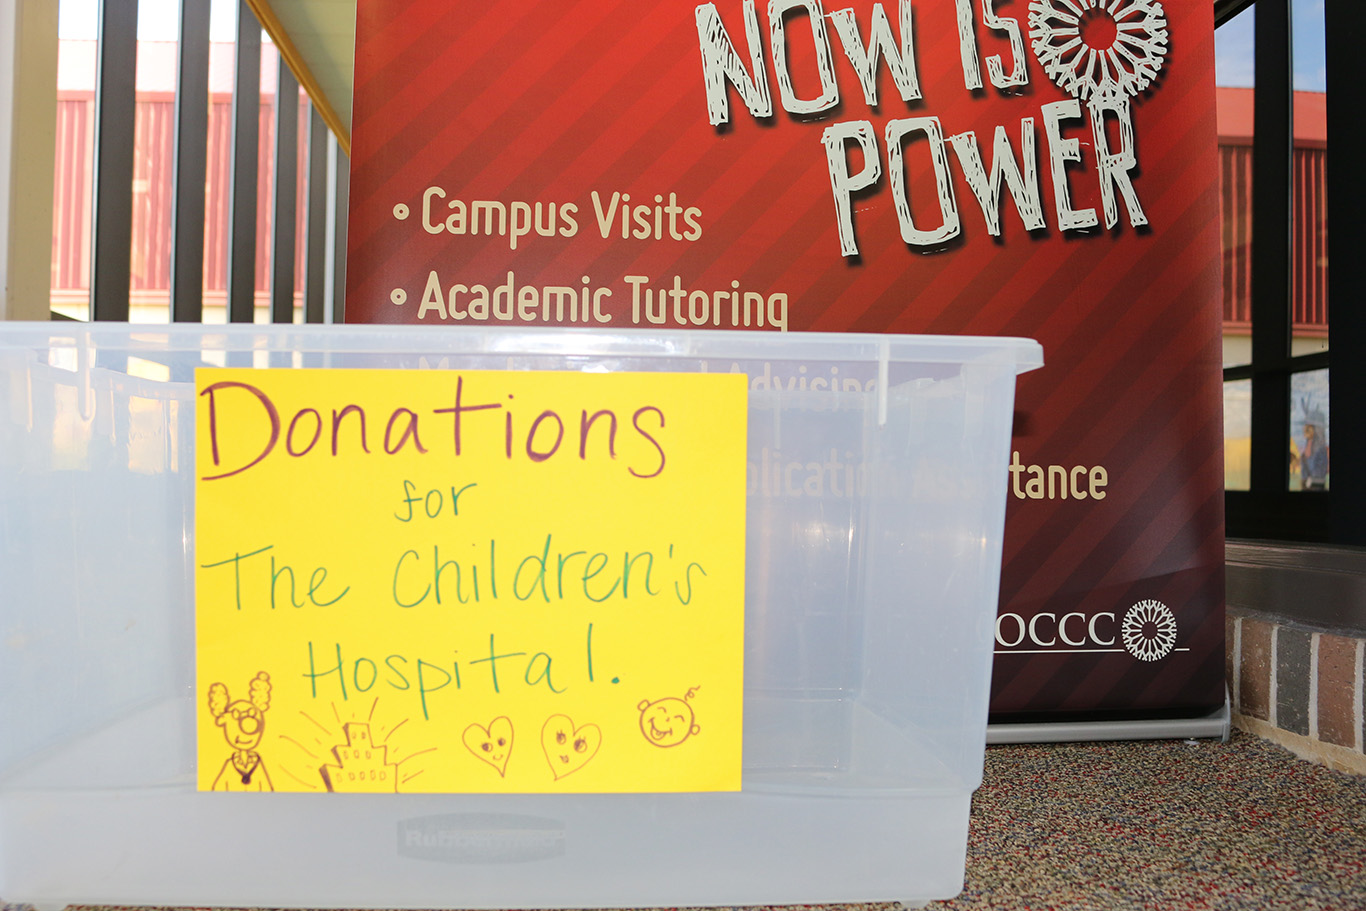 TRIO accepting toys, books and other items to donate to Children’s Hospital